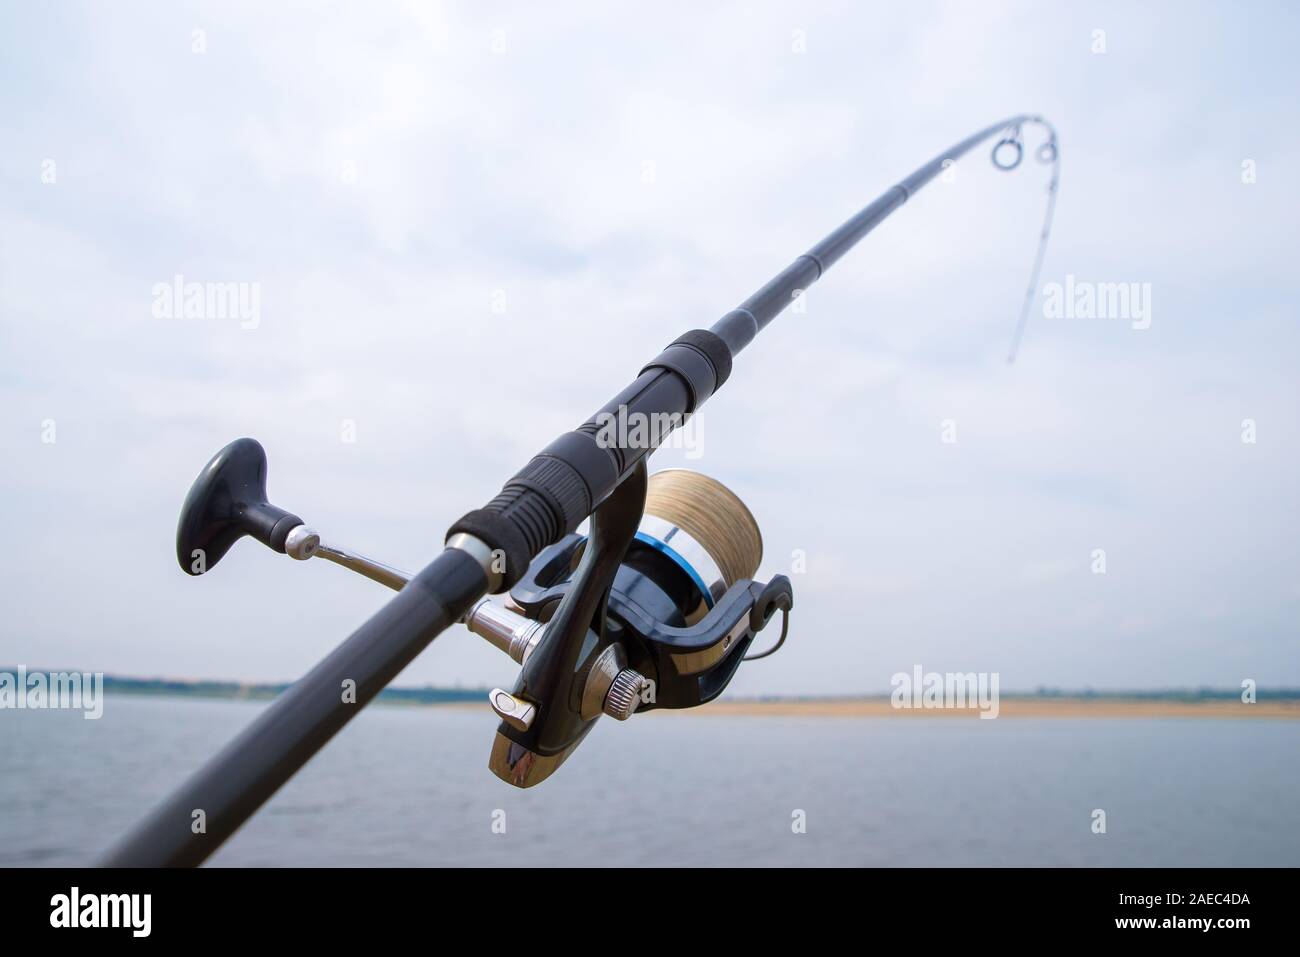 https://c8.alamy.com/comp/2AEC4DA/fishing-rod-with-reel-close-up-the-fishing-rod-is-bent-and-fully-tensed-2AEC4DA.jpg